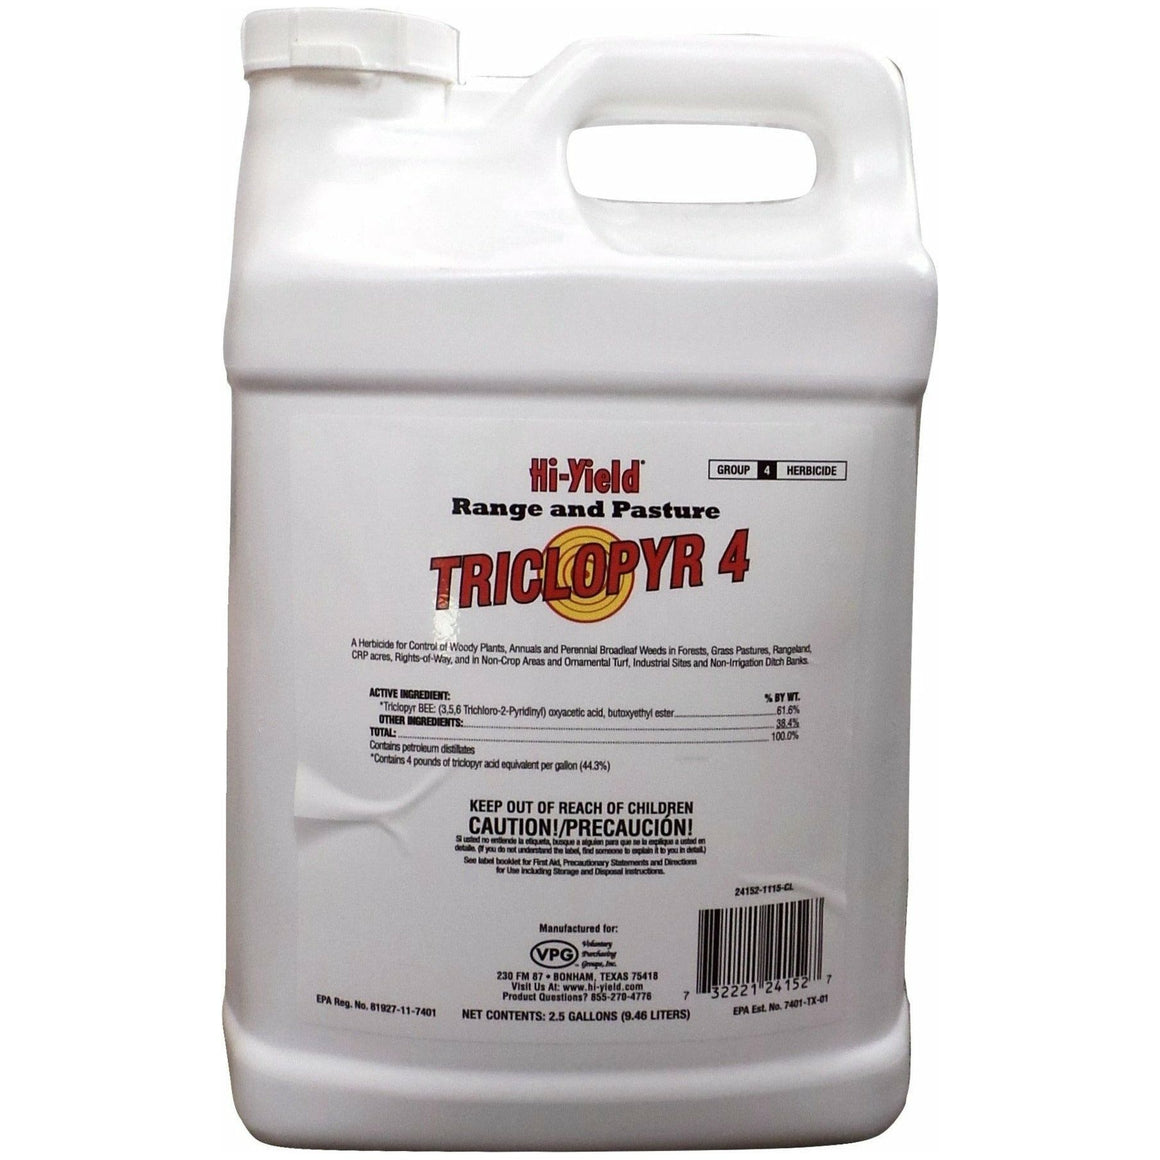 Triclopyr 4 Herbicide - 2.5 Gallons - Seed World